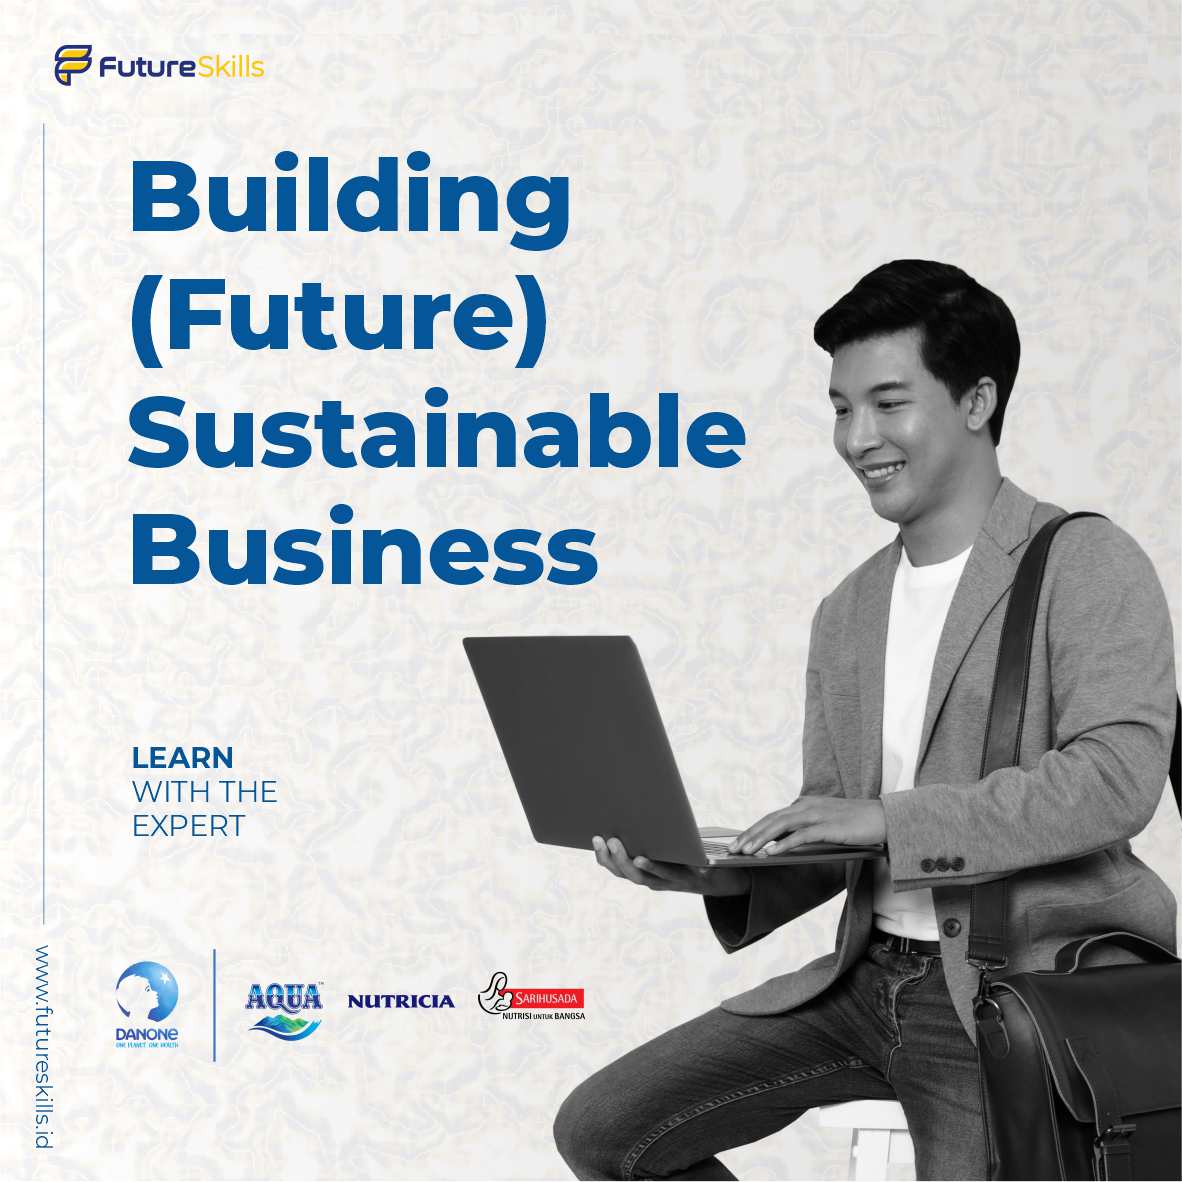 Building (Future) Sustainable Business